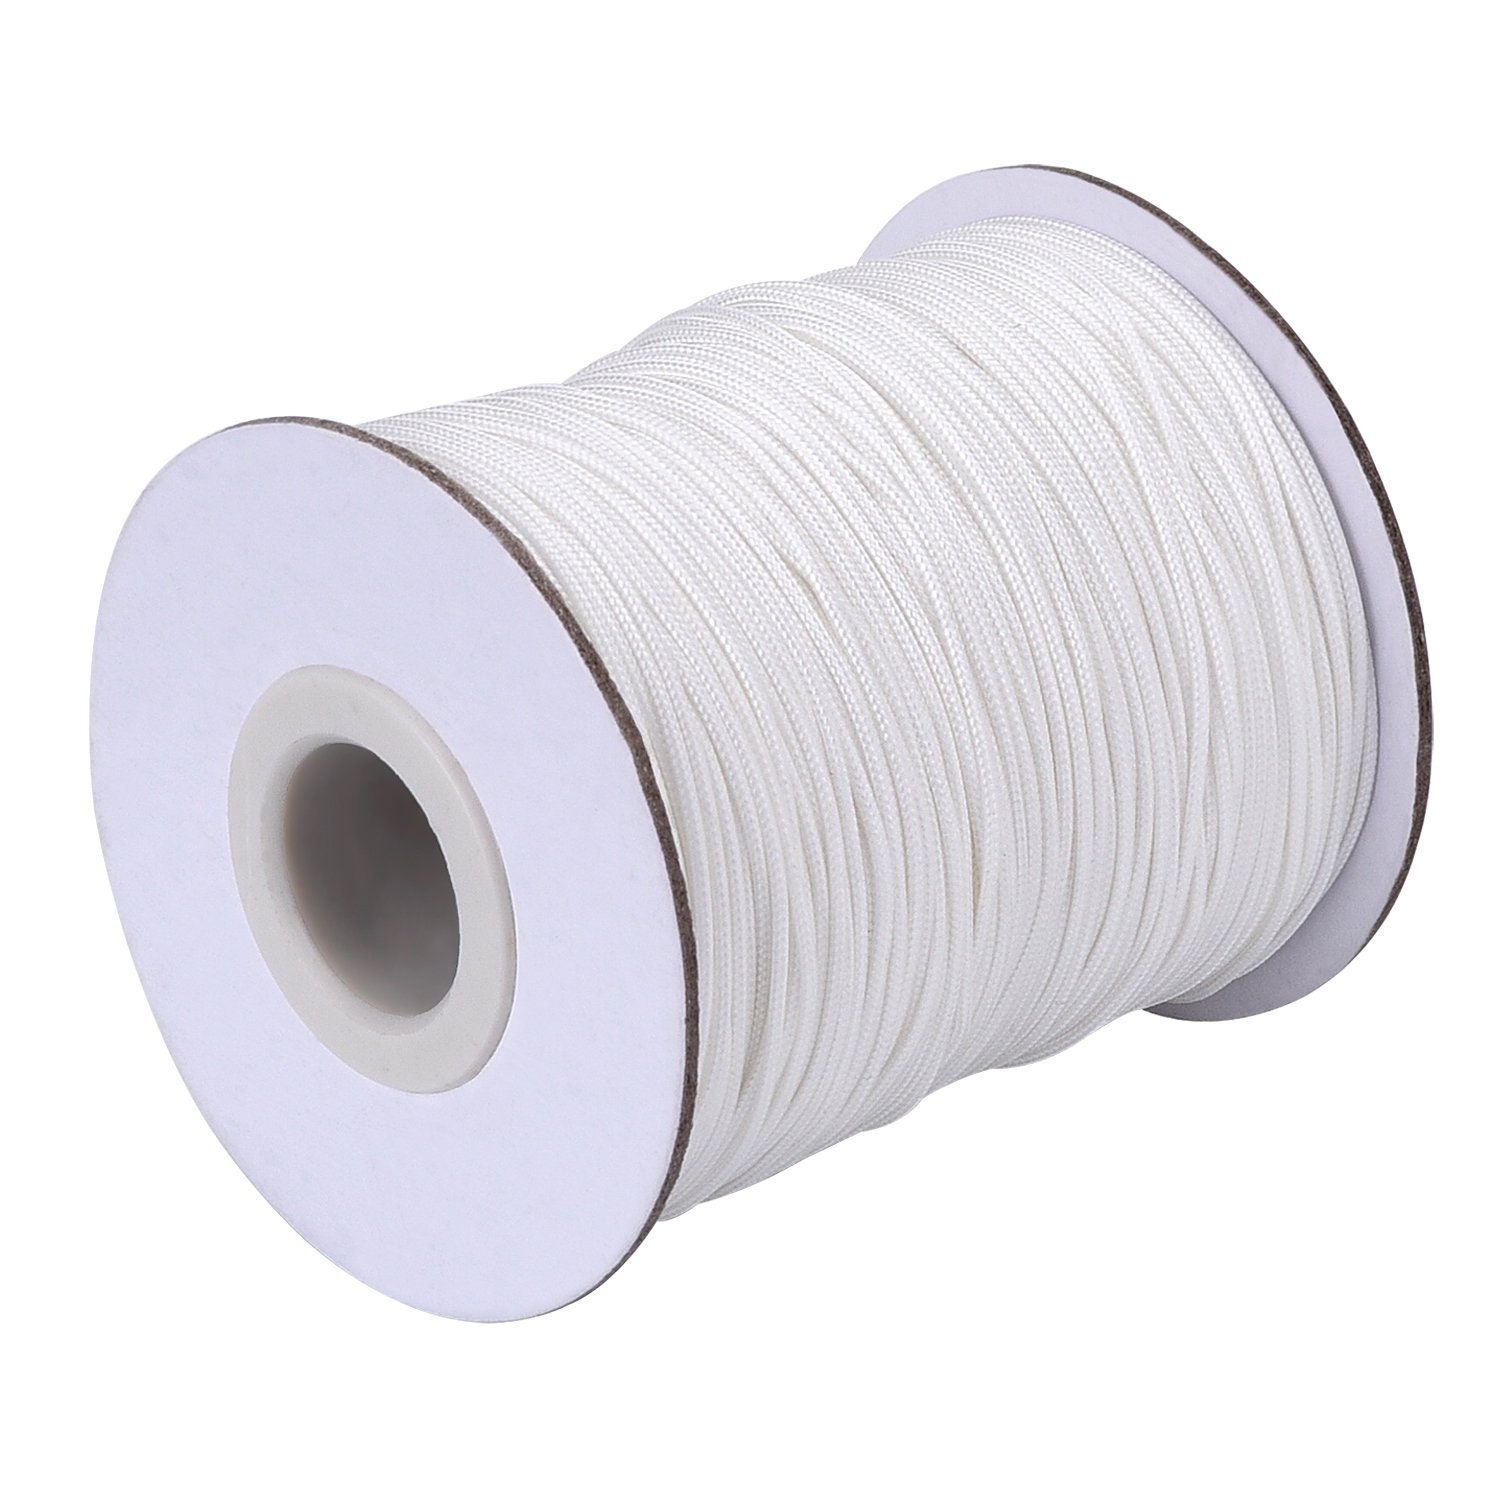 WILDFIRE, Black or White, 50 Yard Spool with hanging clip